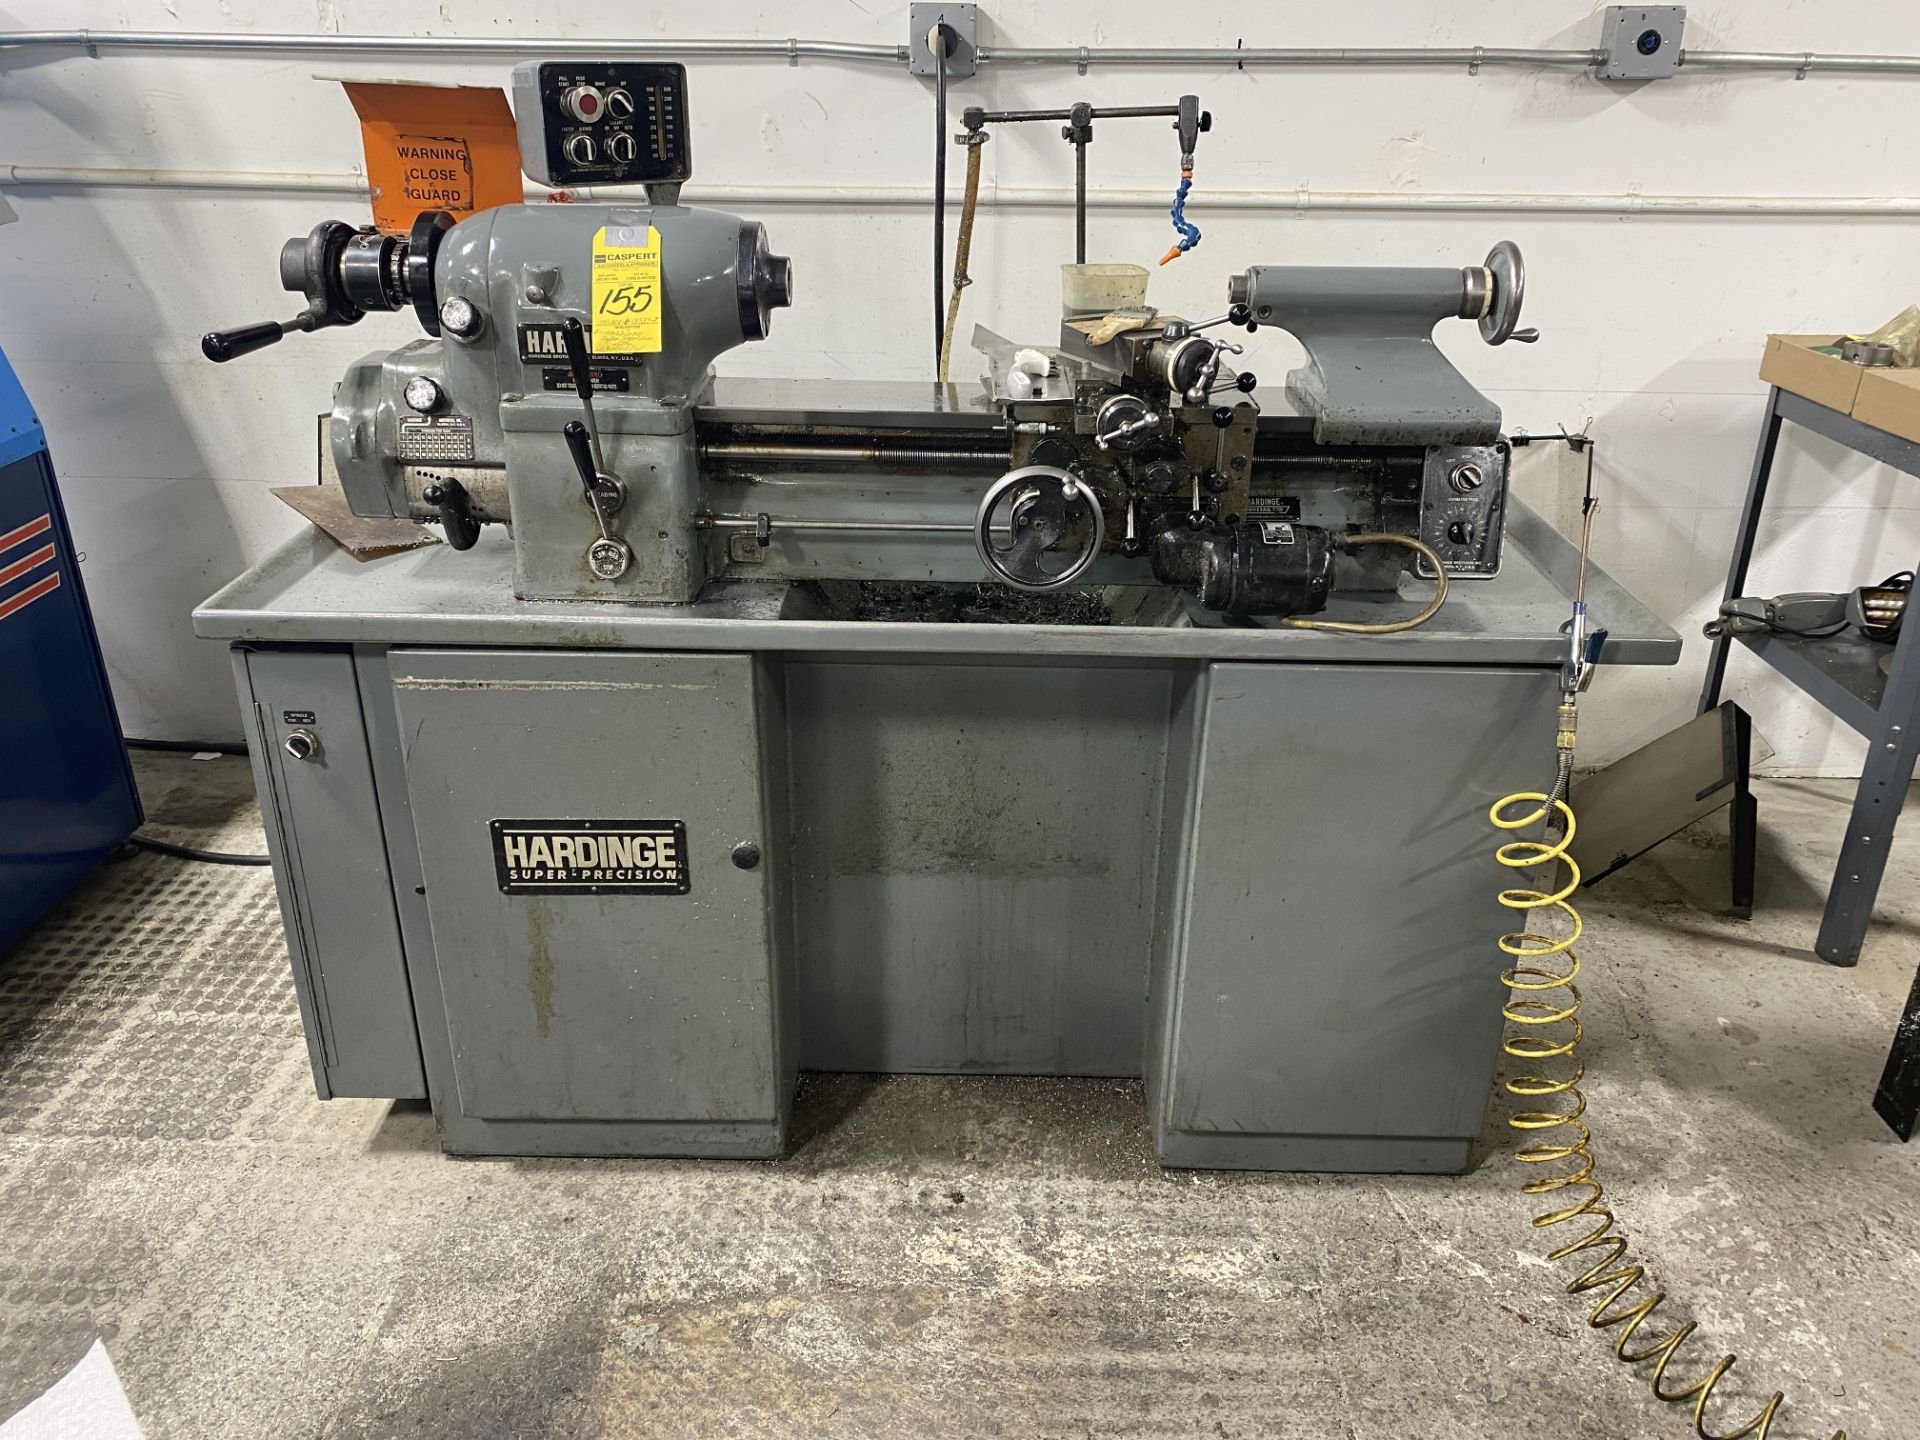 Hardinge Super Precision Lathe with Dove Tail Bed, SN: HLV-H-13537-T